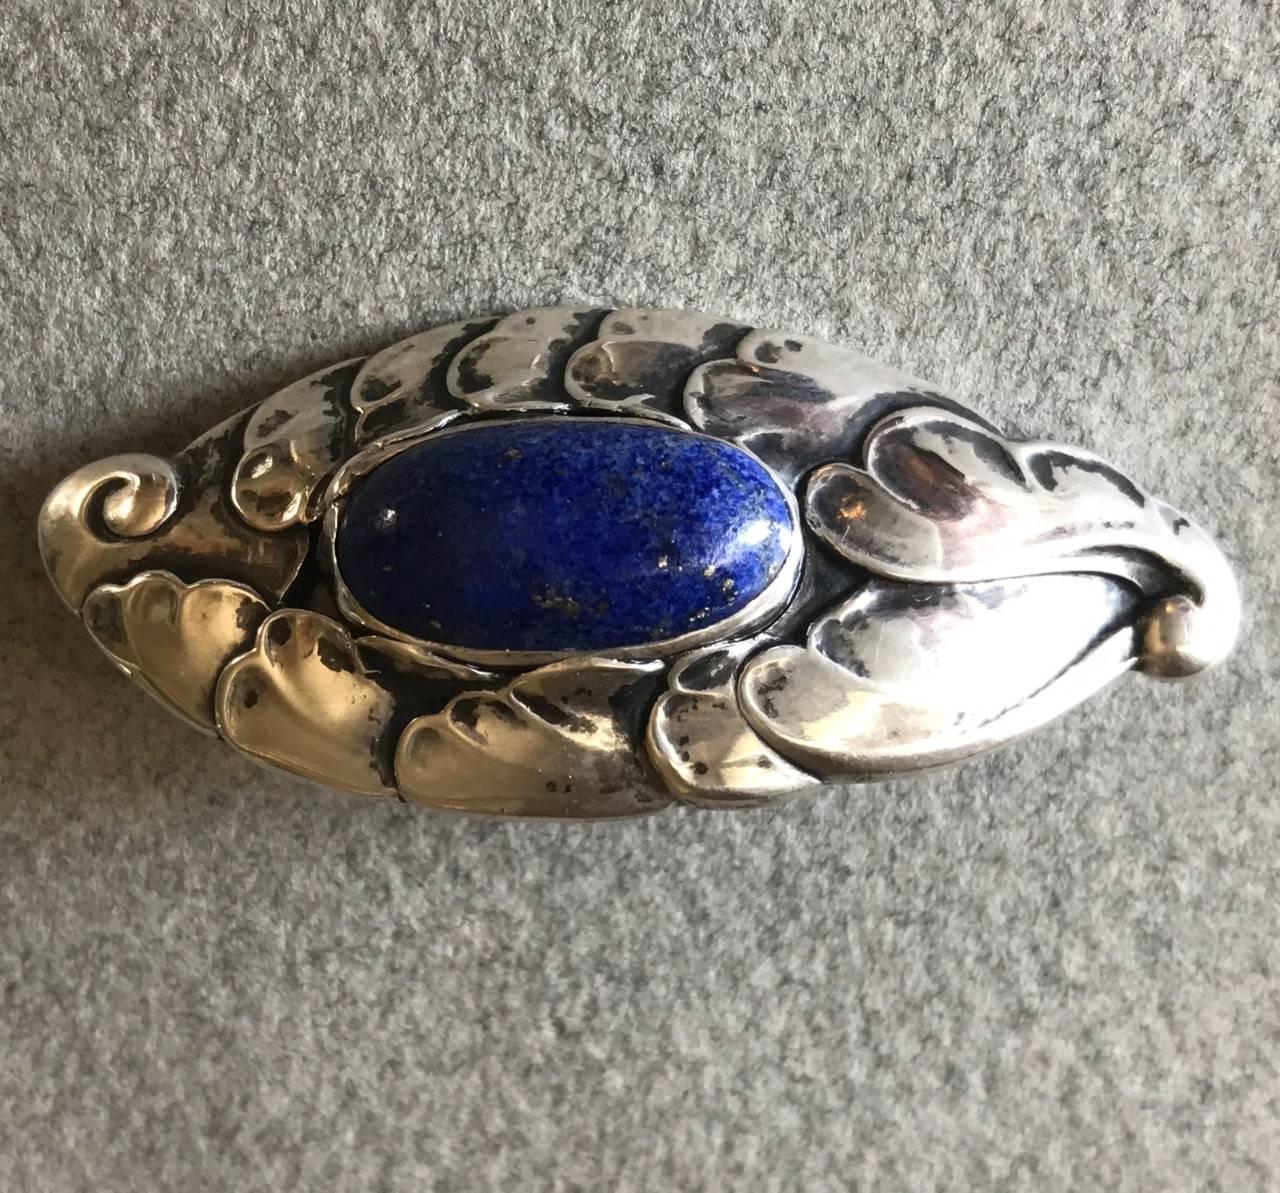 Georg Jensen 830 Silver Brooch No. 168 With Lapis Lazuli.

Almond shaped brooch with bright lapis lazuli stone and foliate detail. Trombone clasp. Very good condition. Rarely seen.

Early hallmarks indicate 1919-1927.

Discreetly engraved initials.